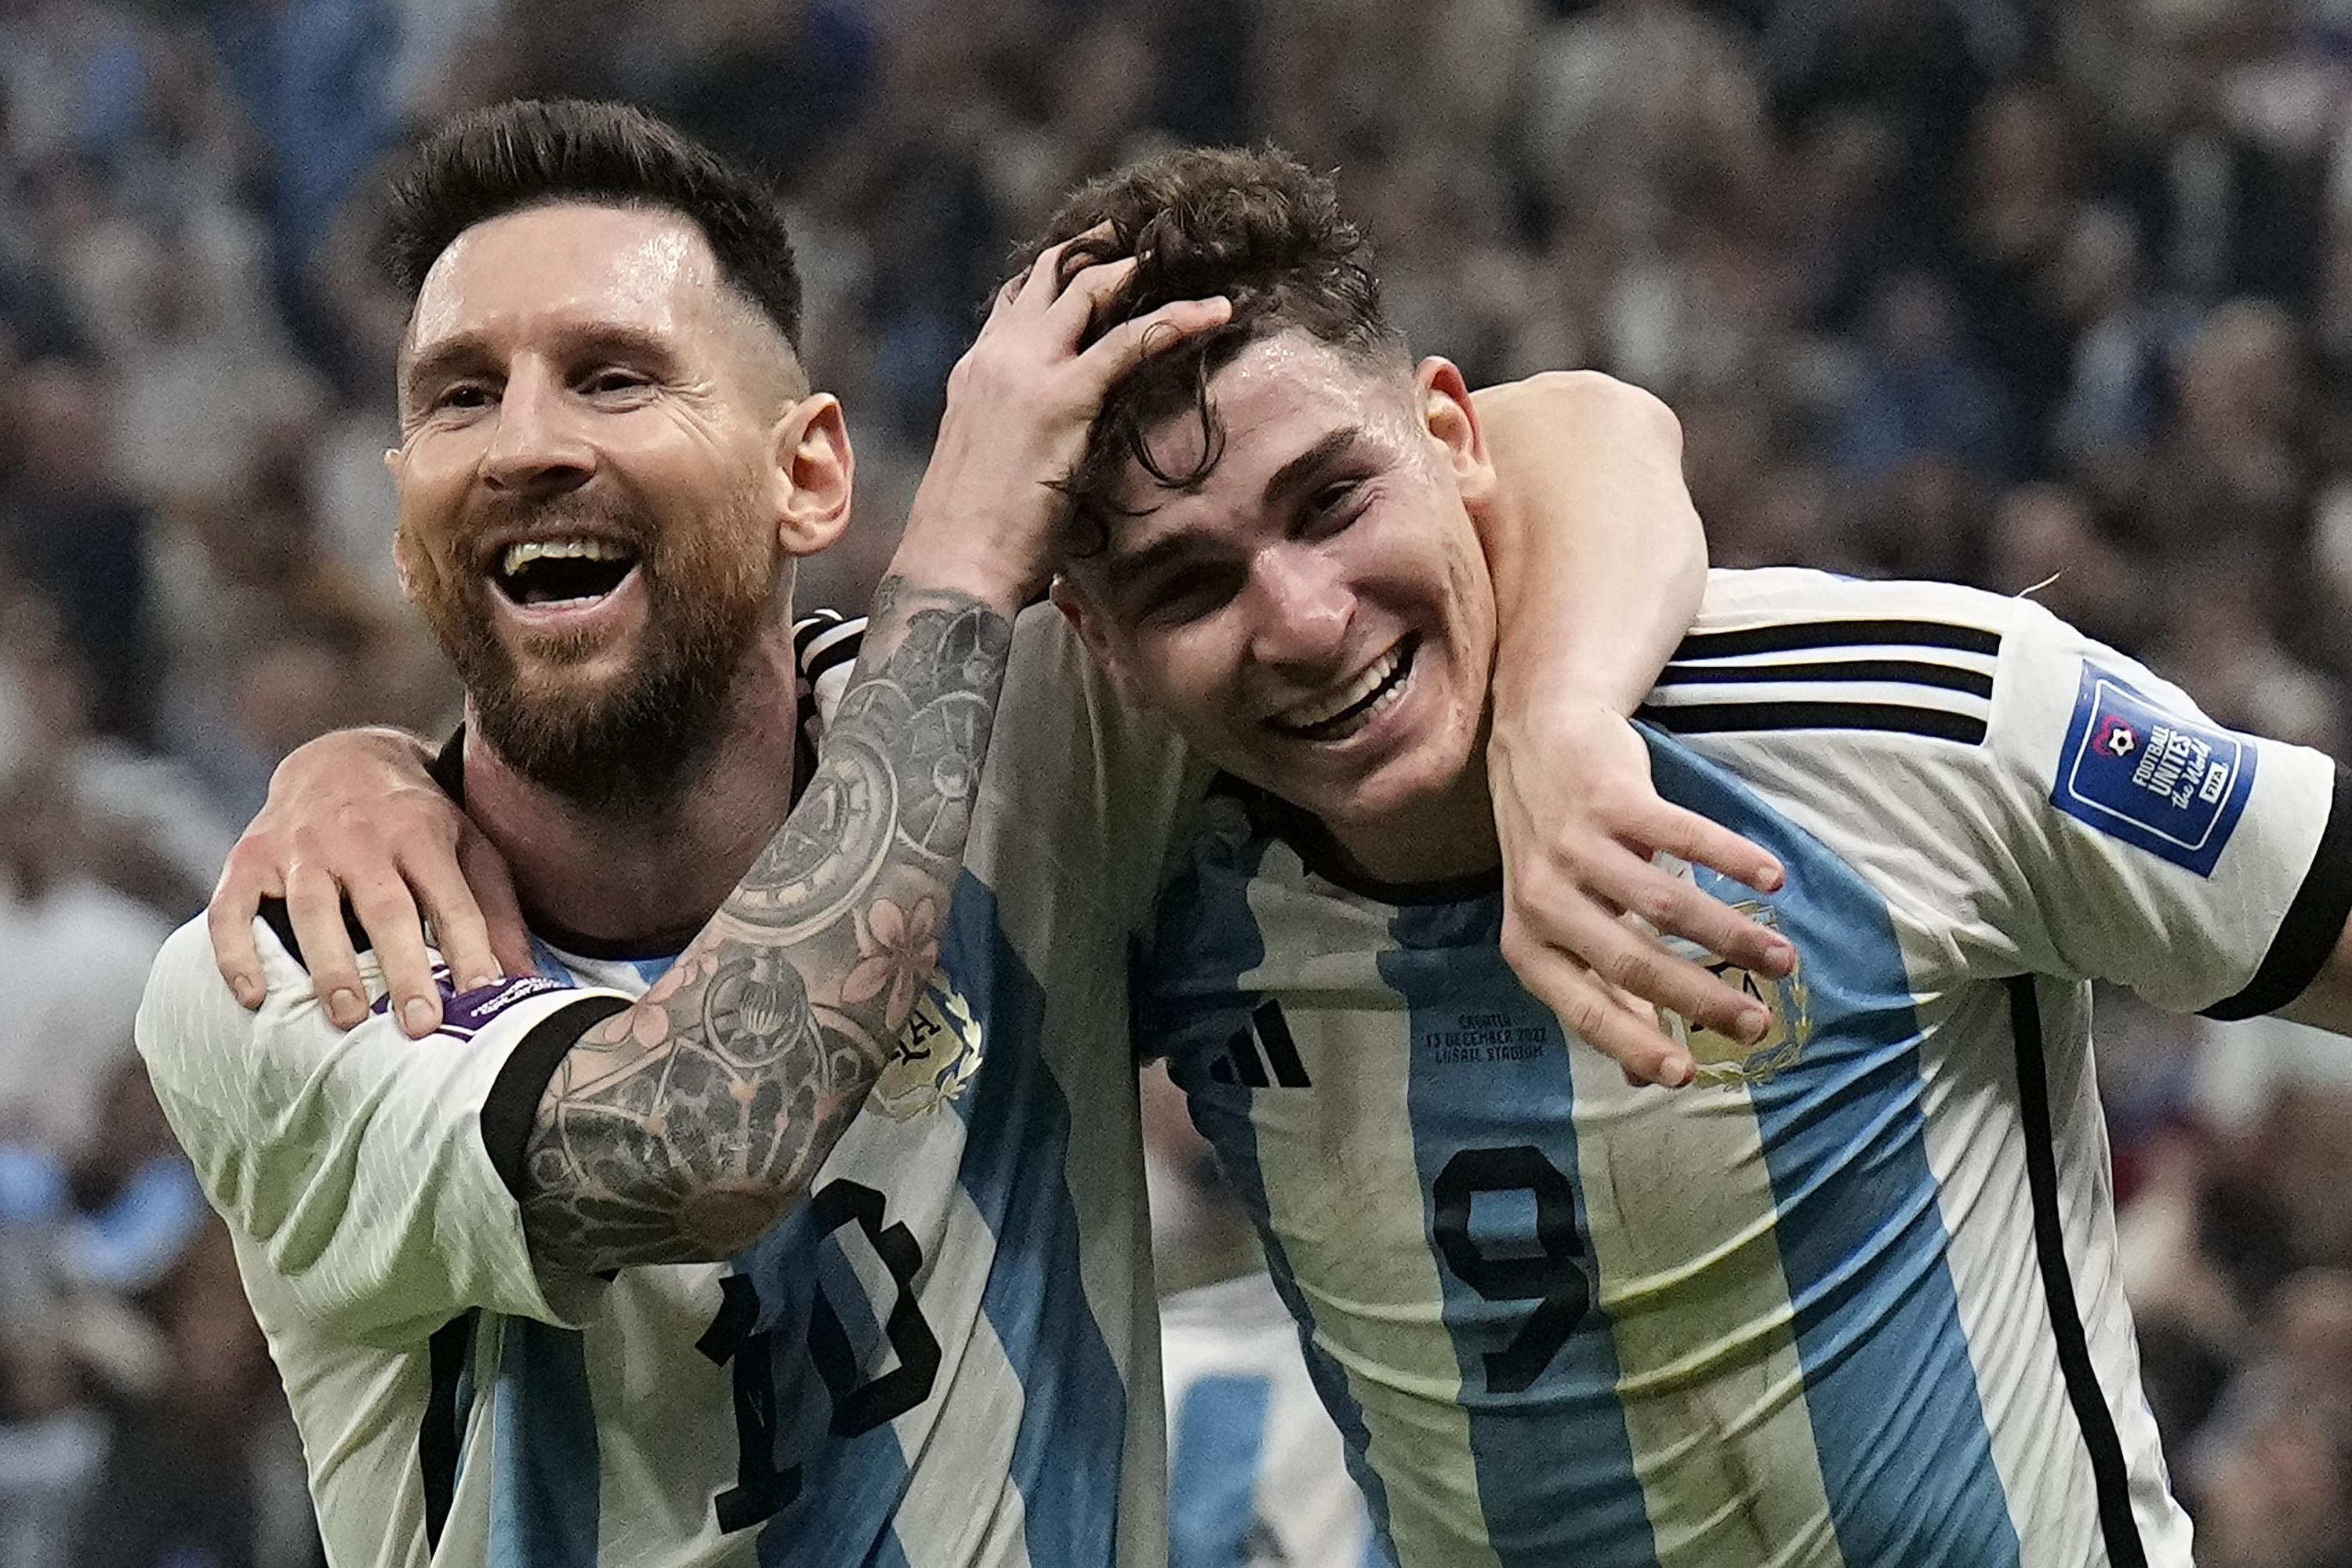 Live updates, Argentina wins World Cup final against France